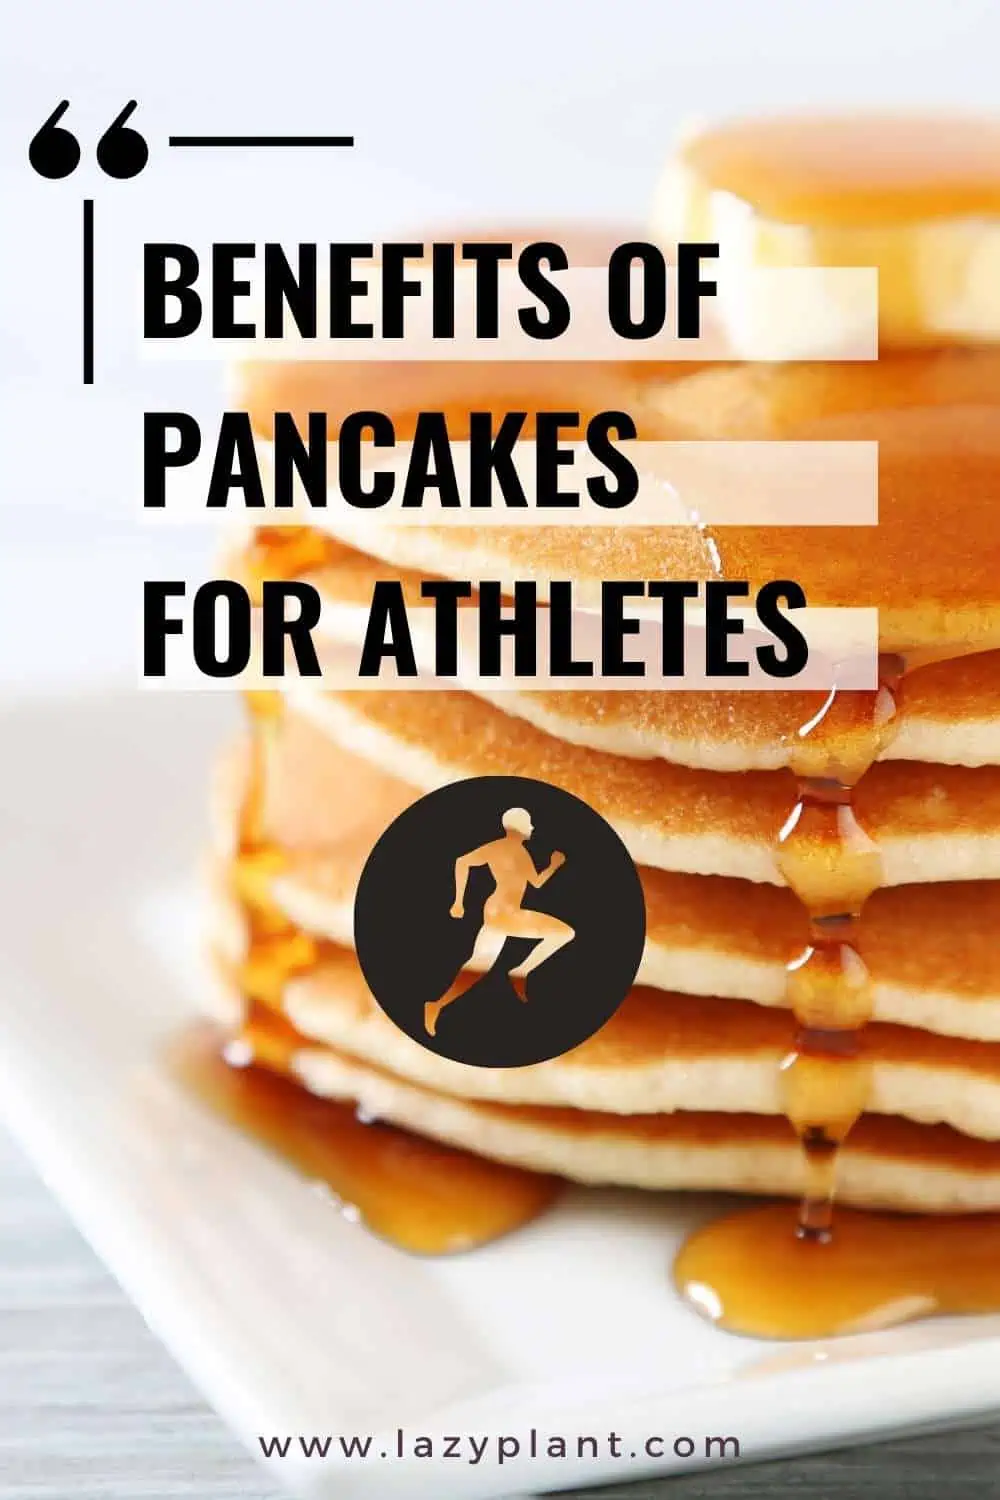 eating pancakes after exercise has many benefits for runners and bodybuilders!